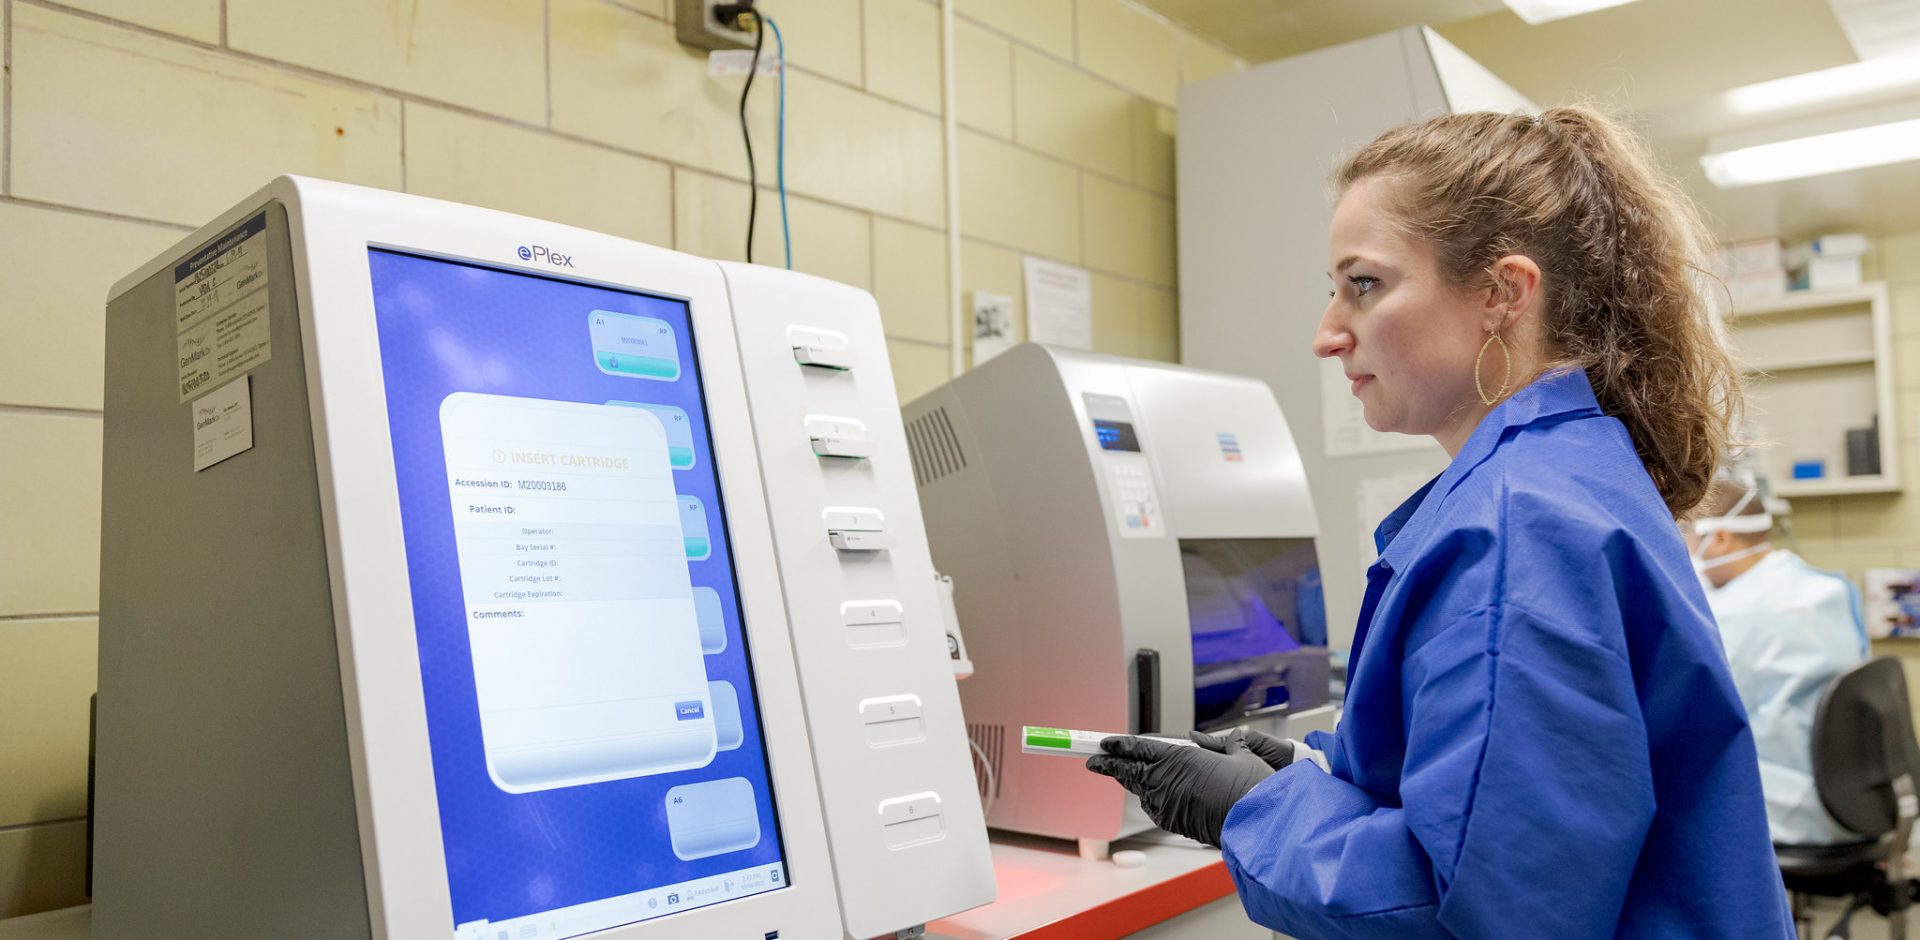 Pennsylvania Commonwealth microbiologist Karen Zimmerman, prepares a master mix for PCR inside the extraction lab at the Pennsylvania Department of Health Bureau of Laboratories on Friday, March 6, 2020.